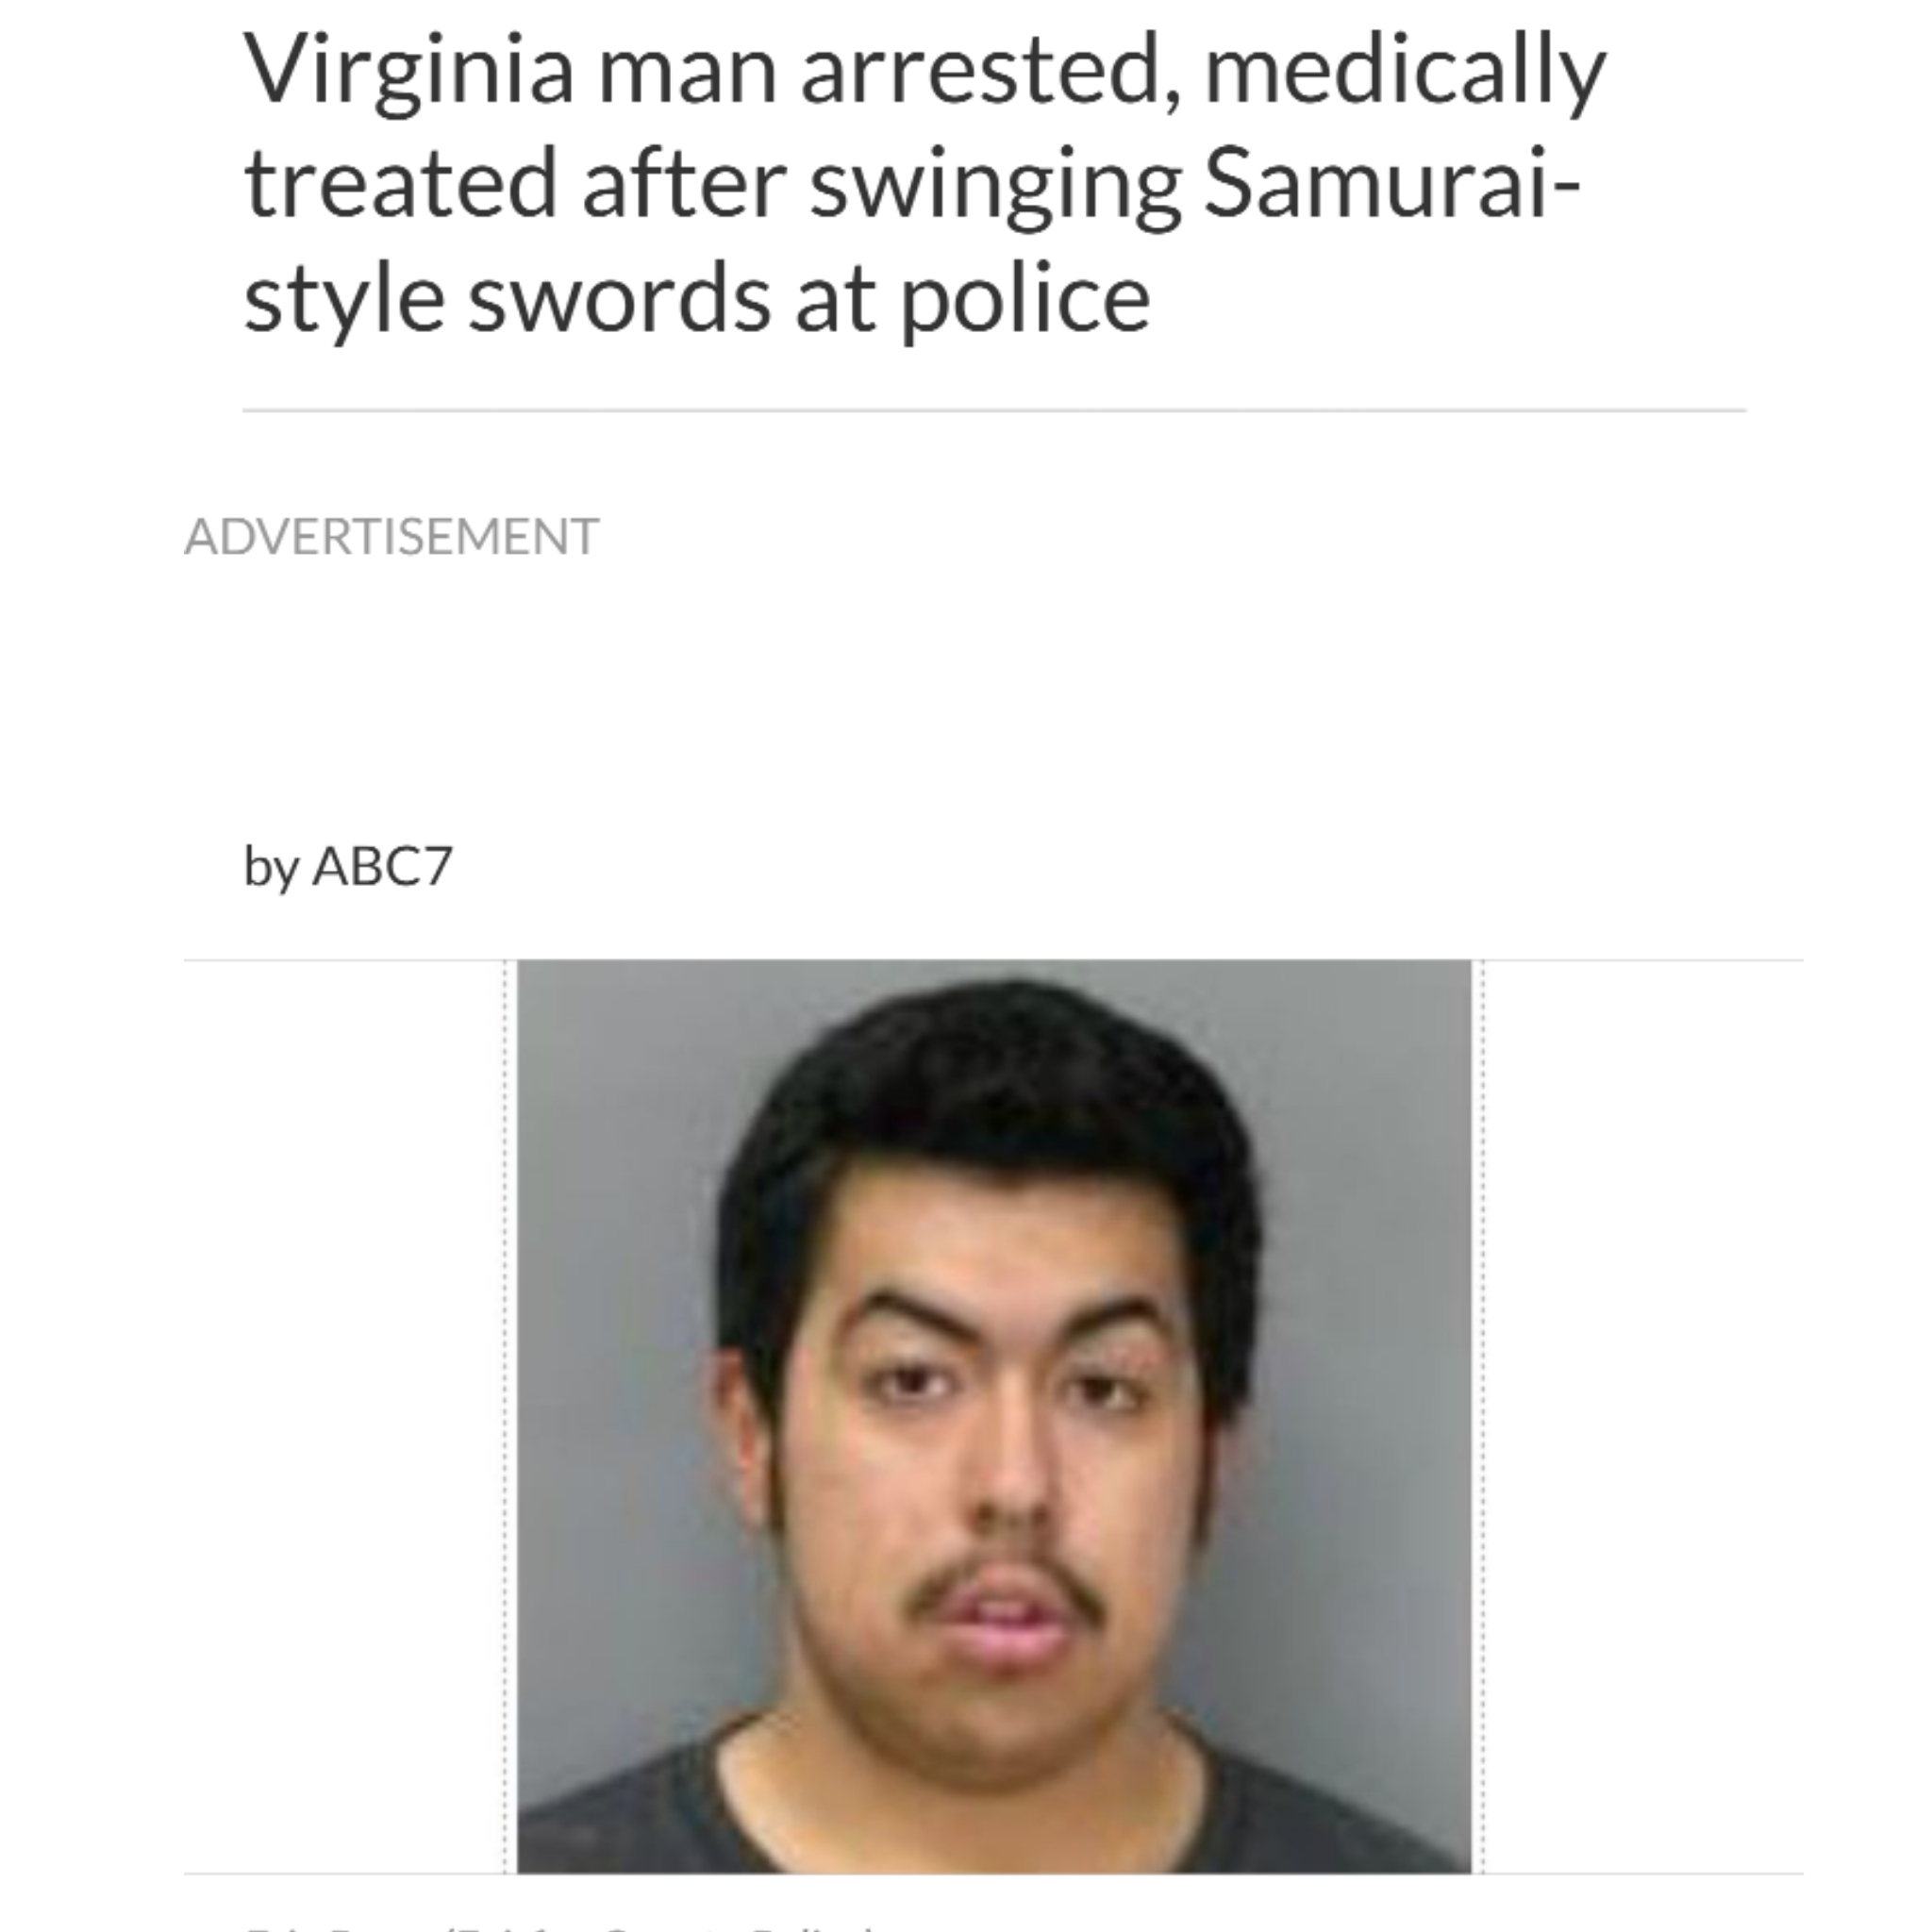 jaw - Virginia man arrested, medically treated after swinging Samurai style swords at police Advertisement by ABC7